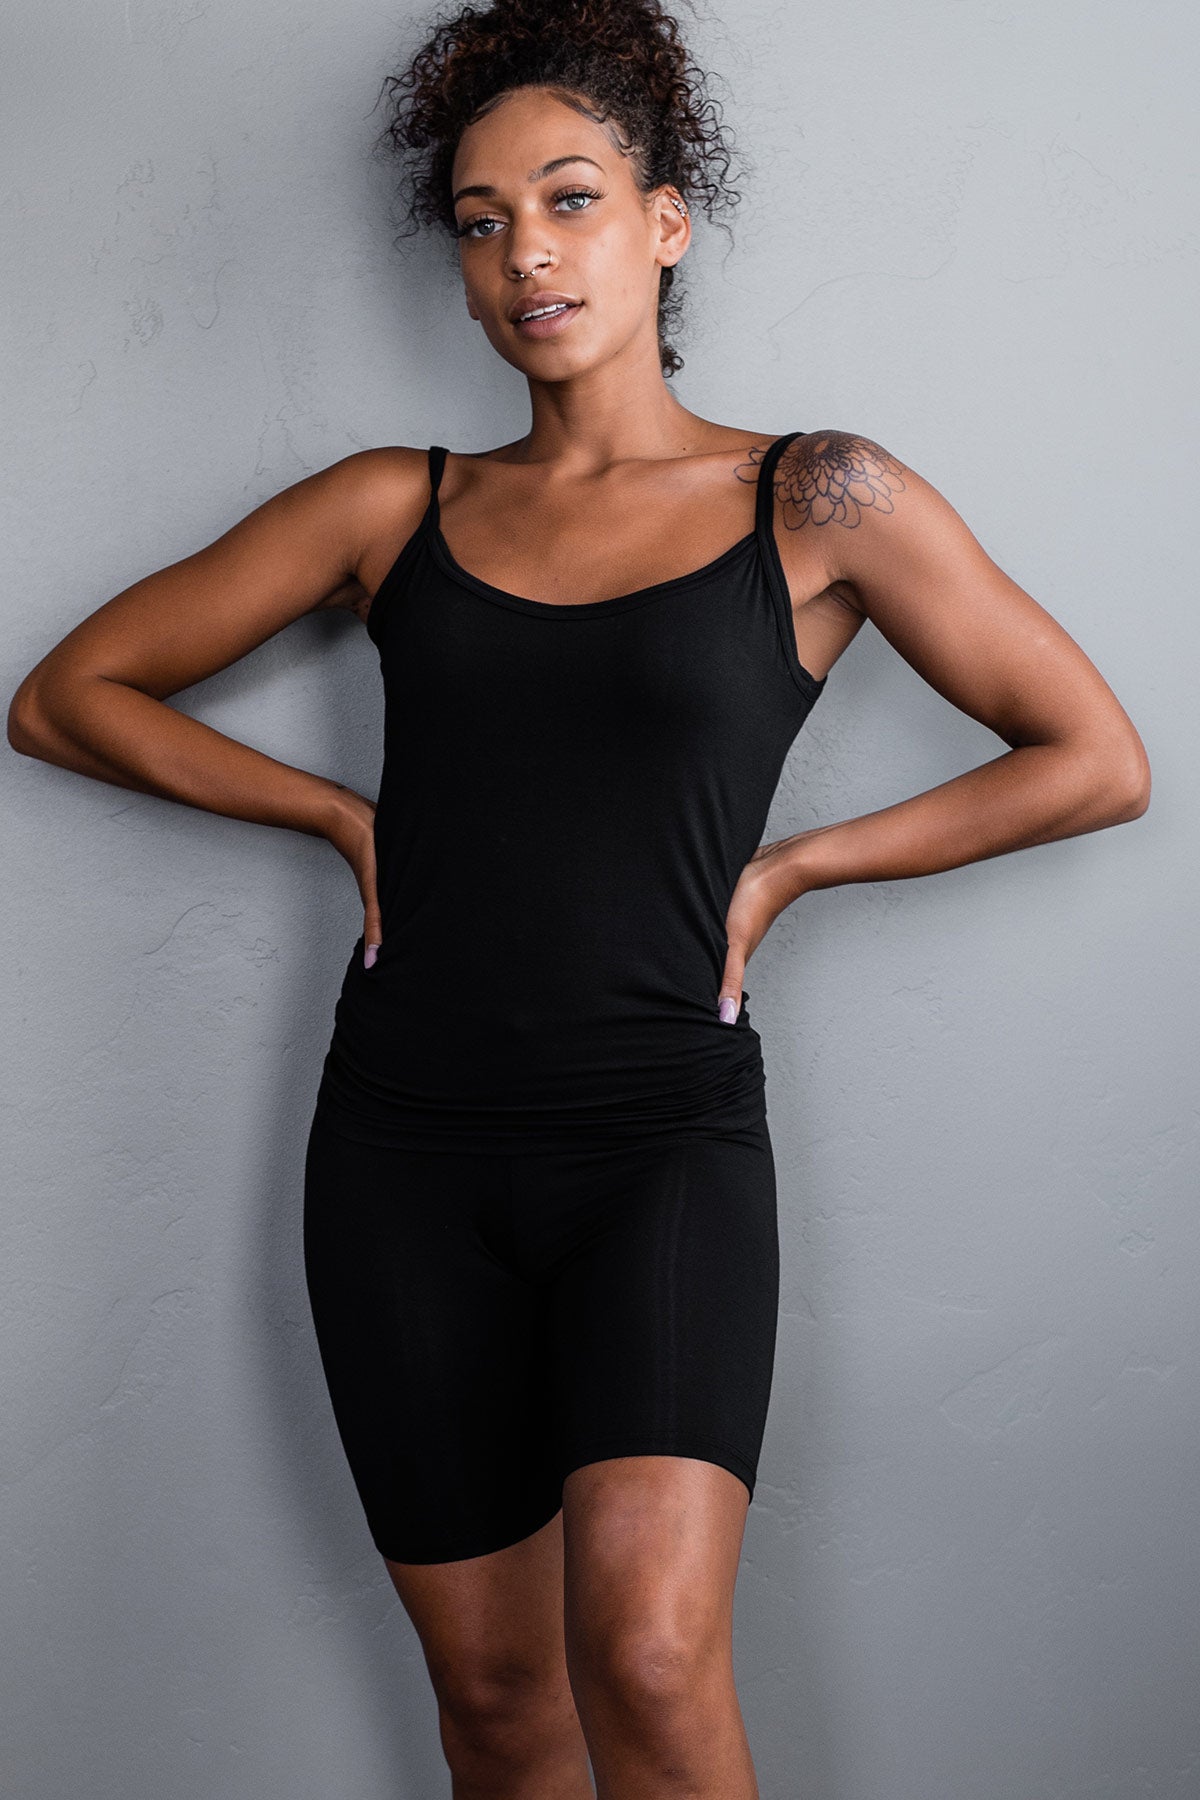 A woman standing with both hands on her hips, wearing Yala Cora Camisole Bamboo Slip in Black